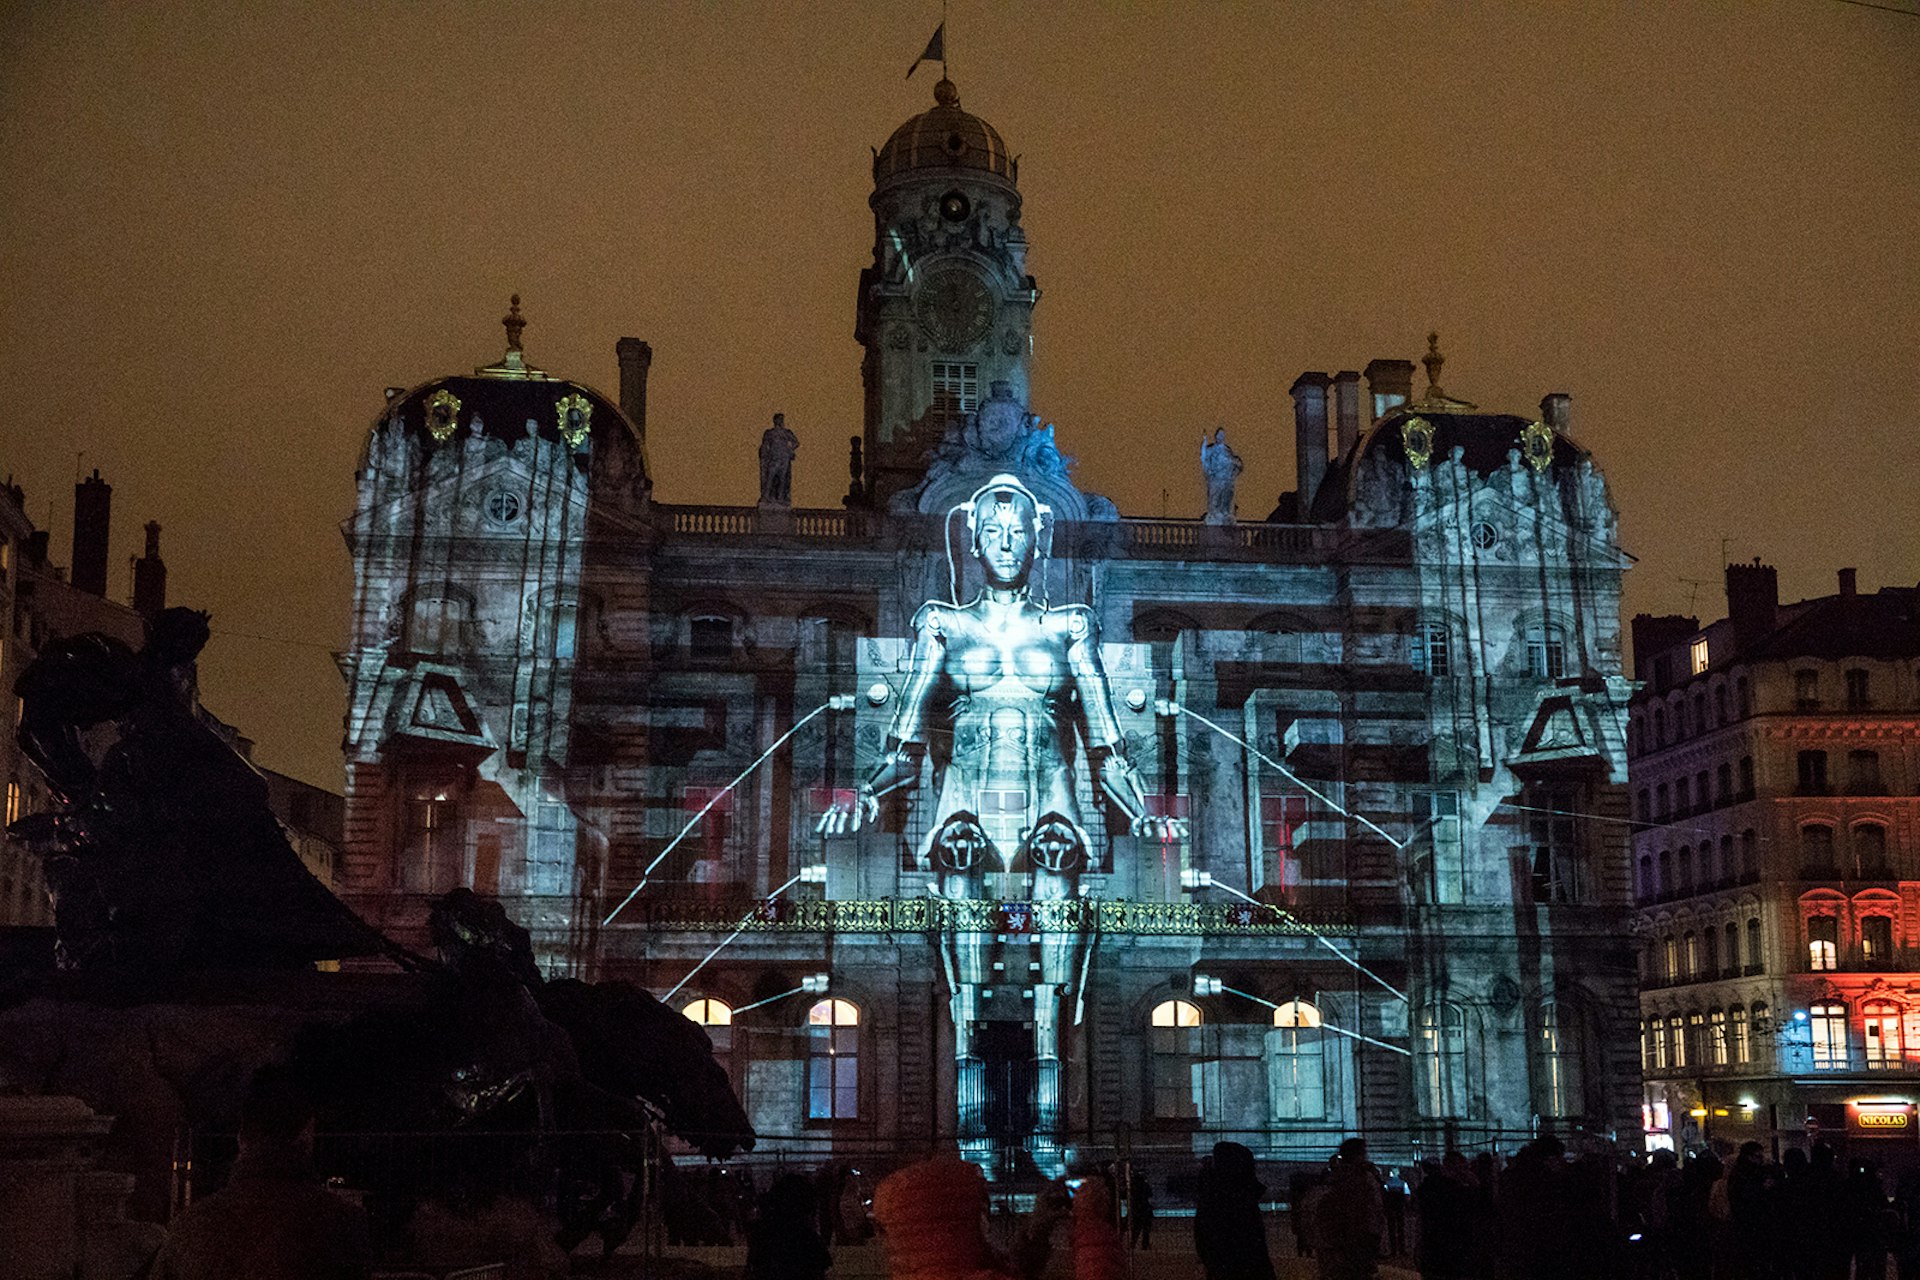 One of the eye-catching images projected on to Lyon’s historic buildings for the annual Fête des Lumières